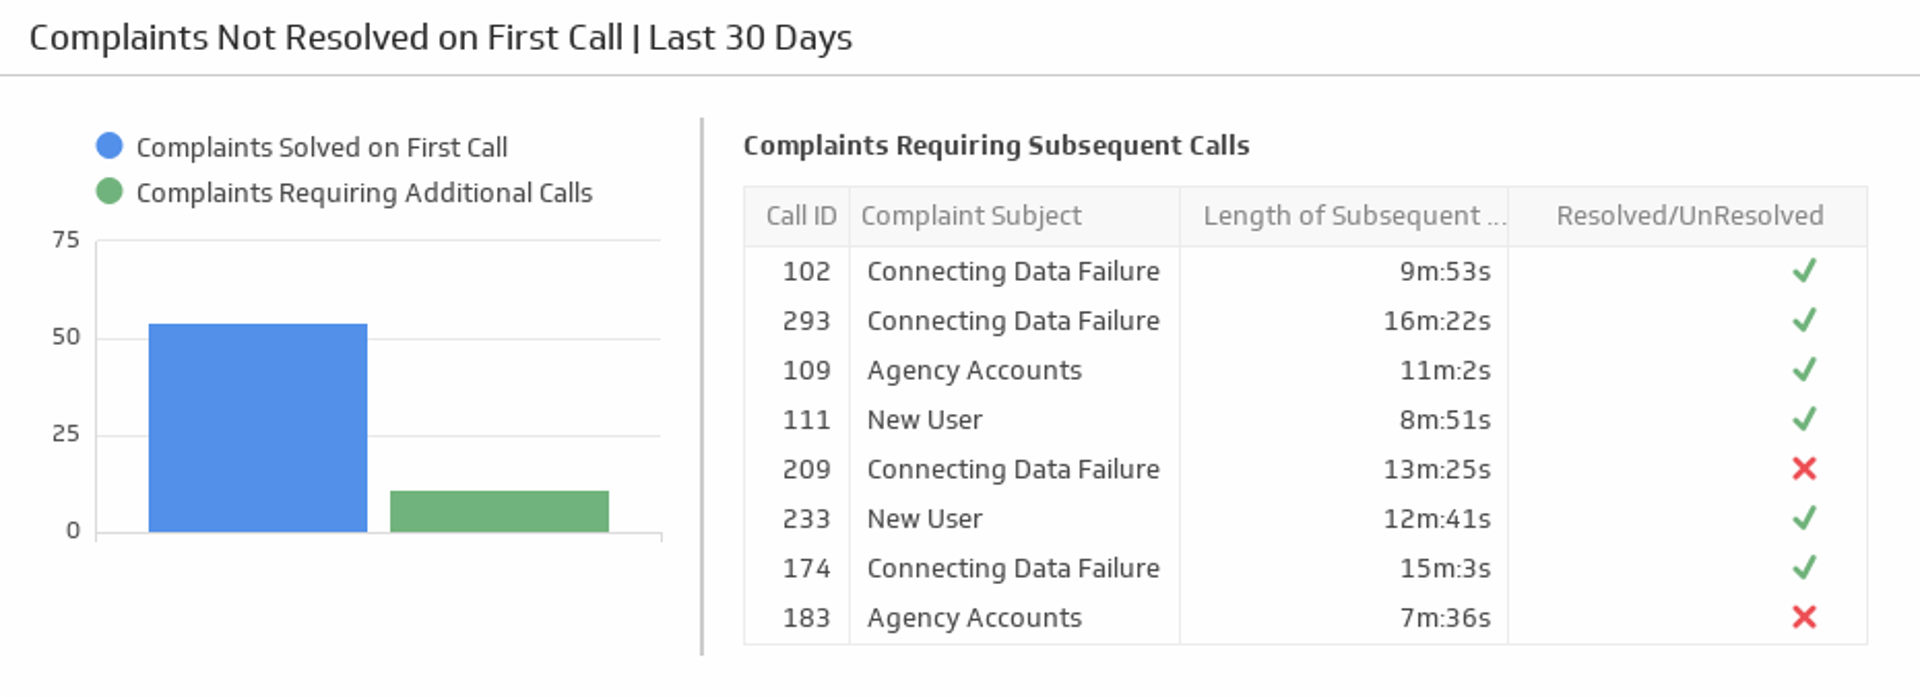 Support KPI Examples - Complaints Not Resolved on First Call Metric